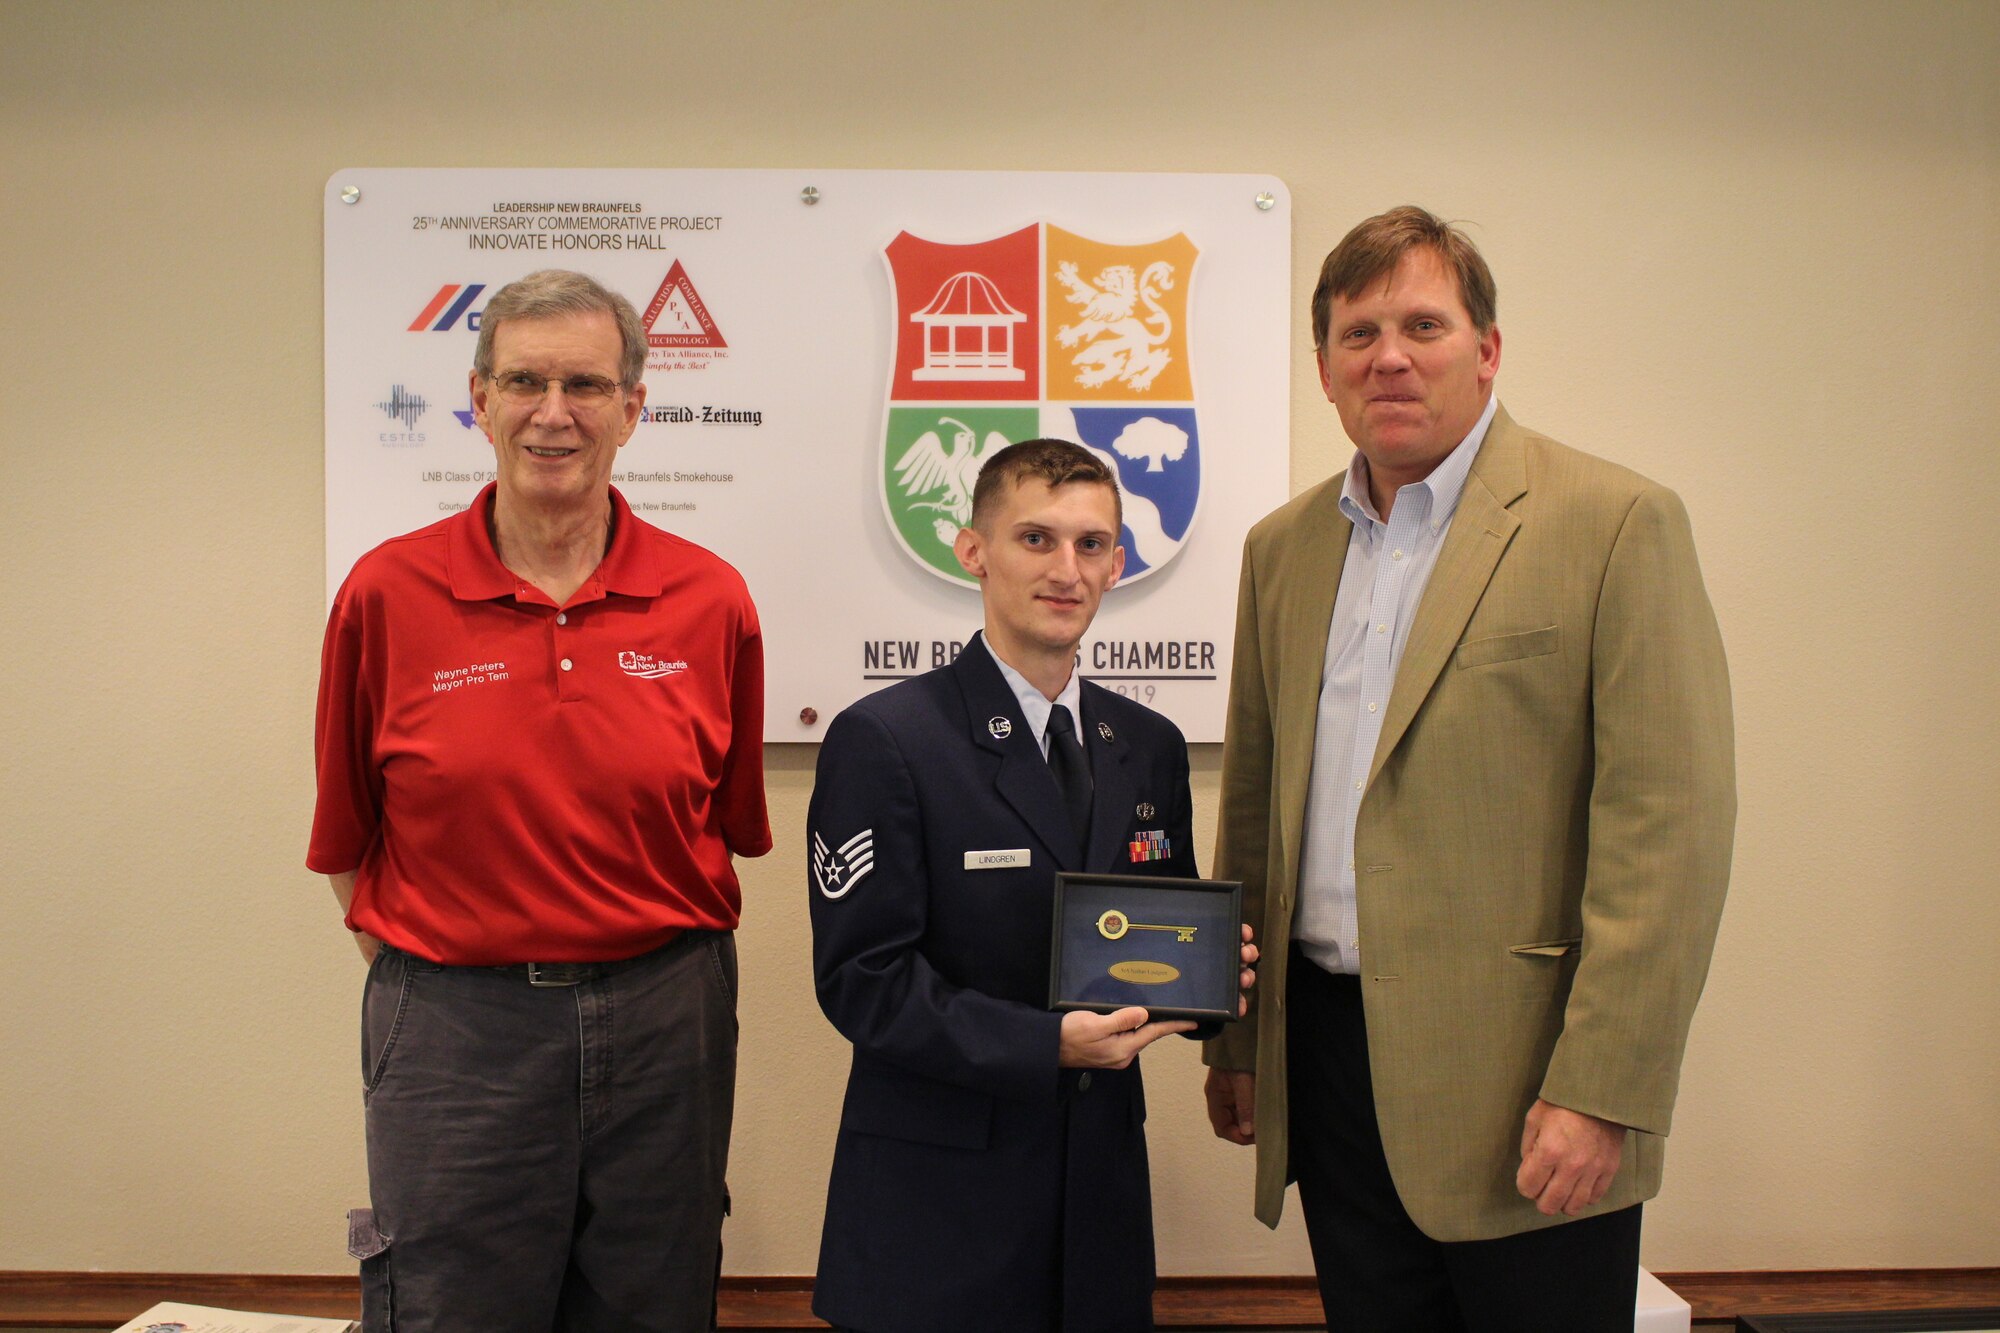 Staff Sgt. Nathan Lindgren, 502 Civil Engineer Squadron firefighter, receives the key to the city from New Braunfels Mayor Pro Tem Wayne Peters, left, and Mayor Barron Casteel during a ceremony on May 14 that honored Lindgren as the New Braunfels Chamber of Commerce Airman of the Quarter.